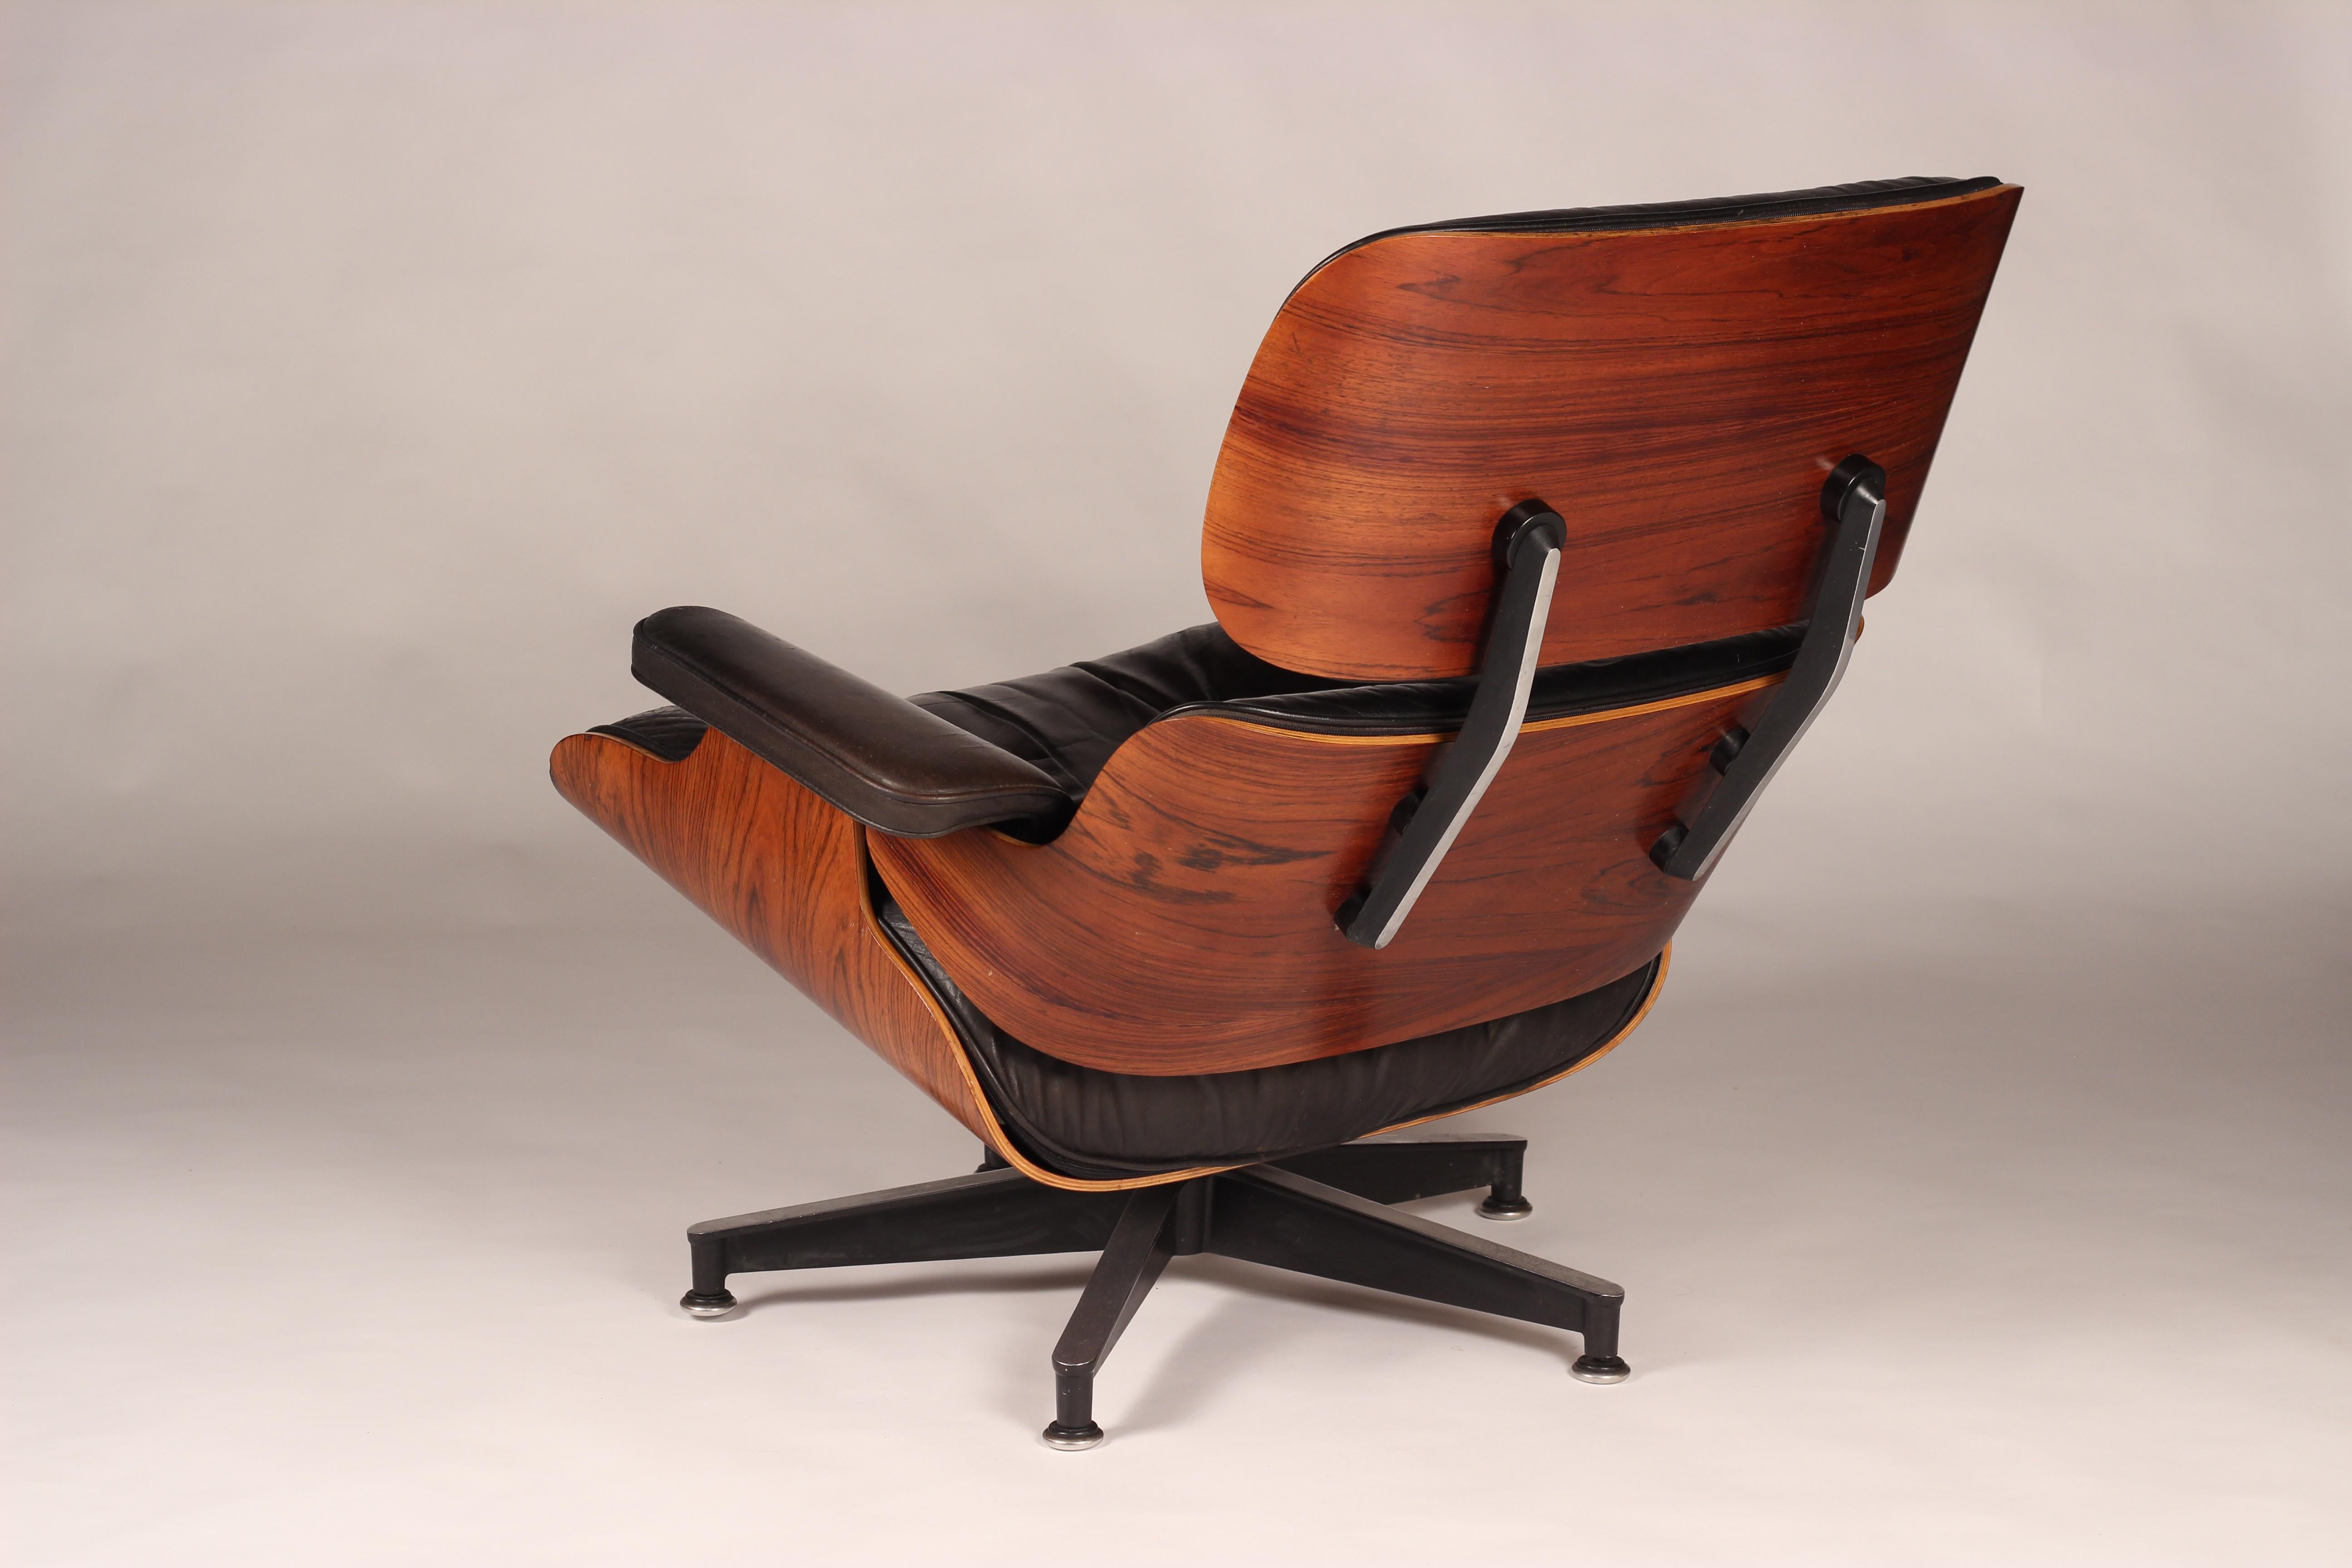 Charles and Ray Eames lounge chair 670 and ottoman 671

The Eames lounge chair and ottoman are furnishings made of molded plywood and leather, designed by Charles and Ray Eames for the Herman Miller furniture company. They are officially titled